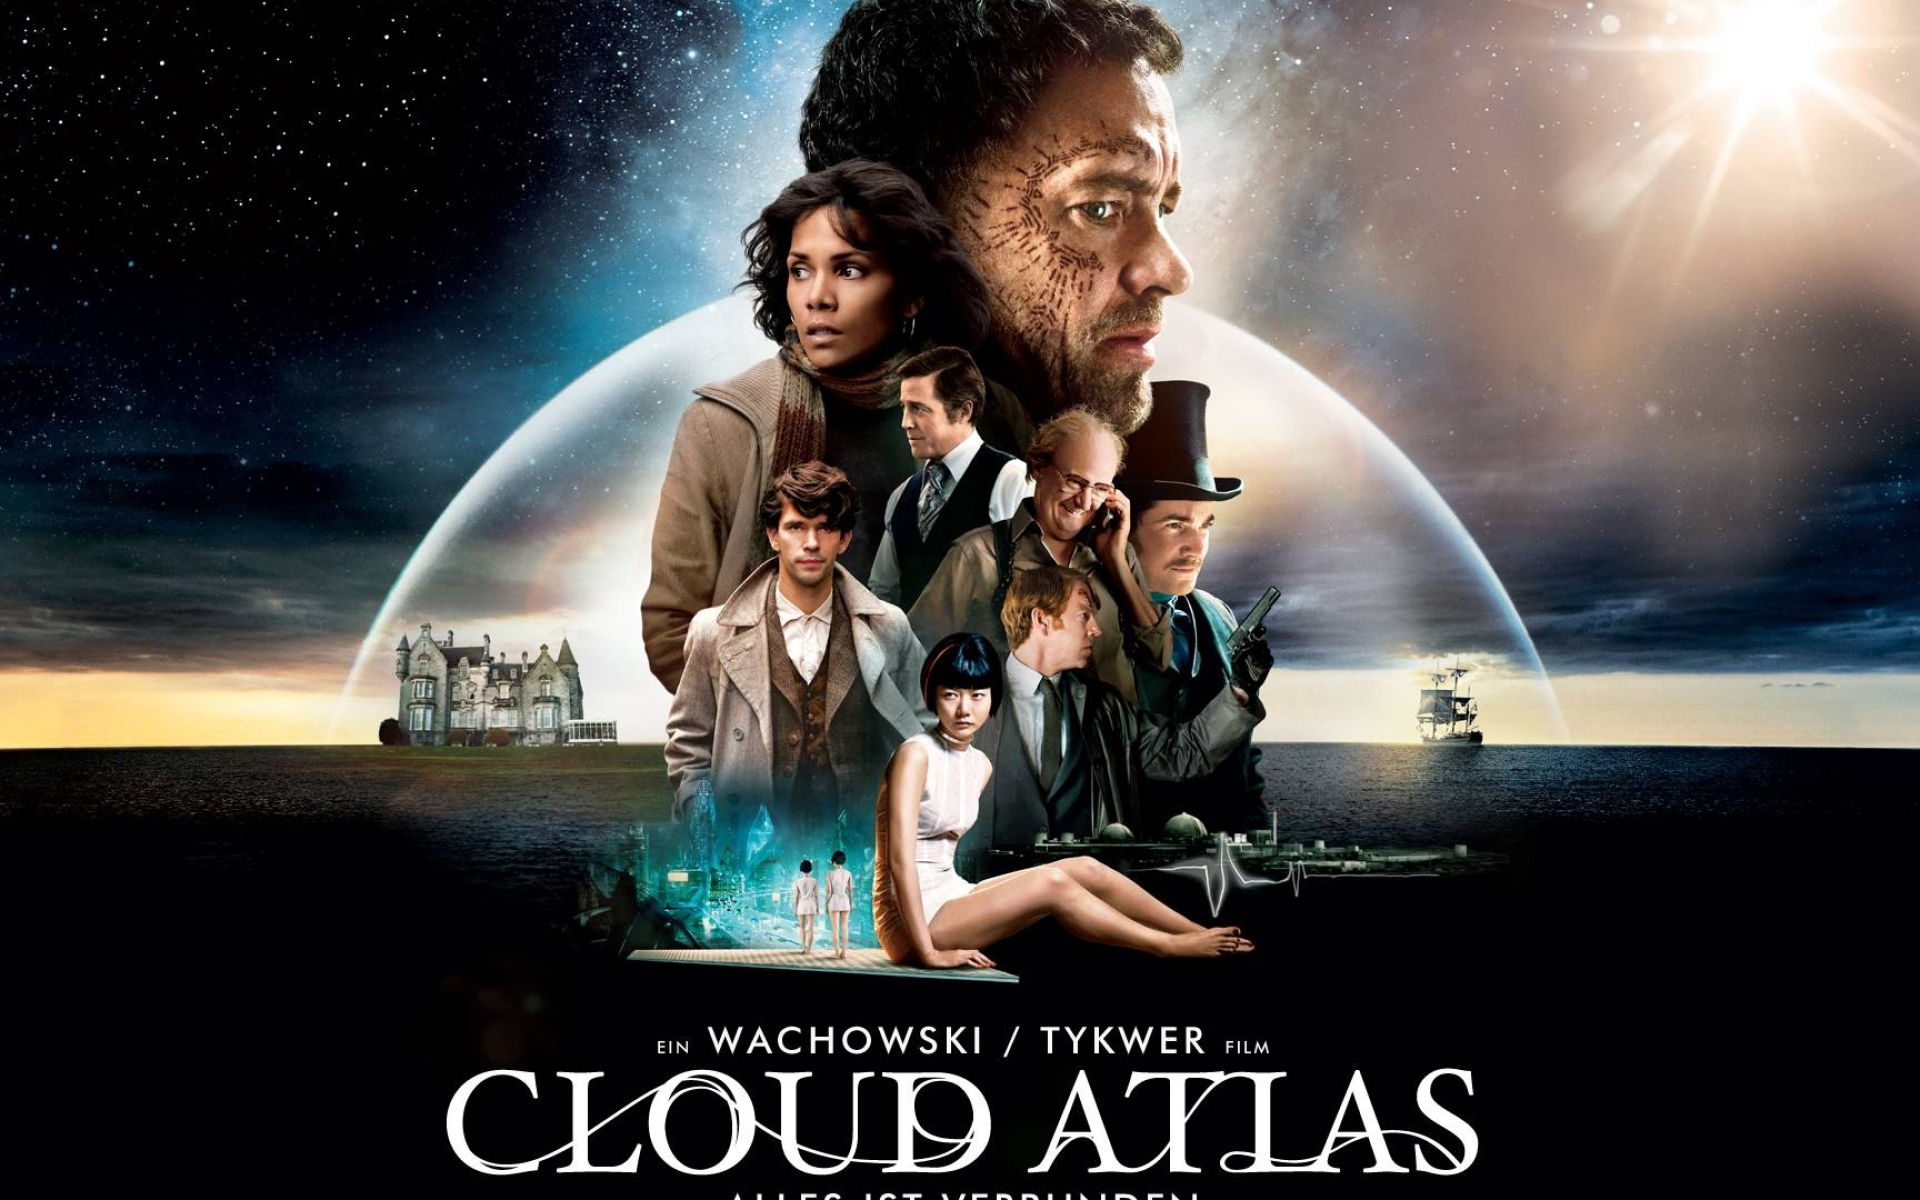 Cloud Atlas: The story jumps between eras, spanning hundreds of years. 1920x1200 HD Background.